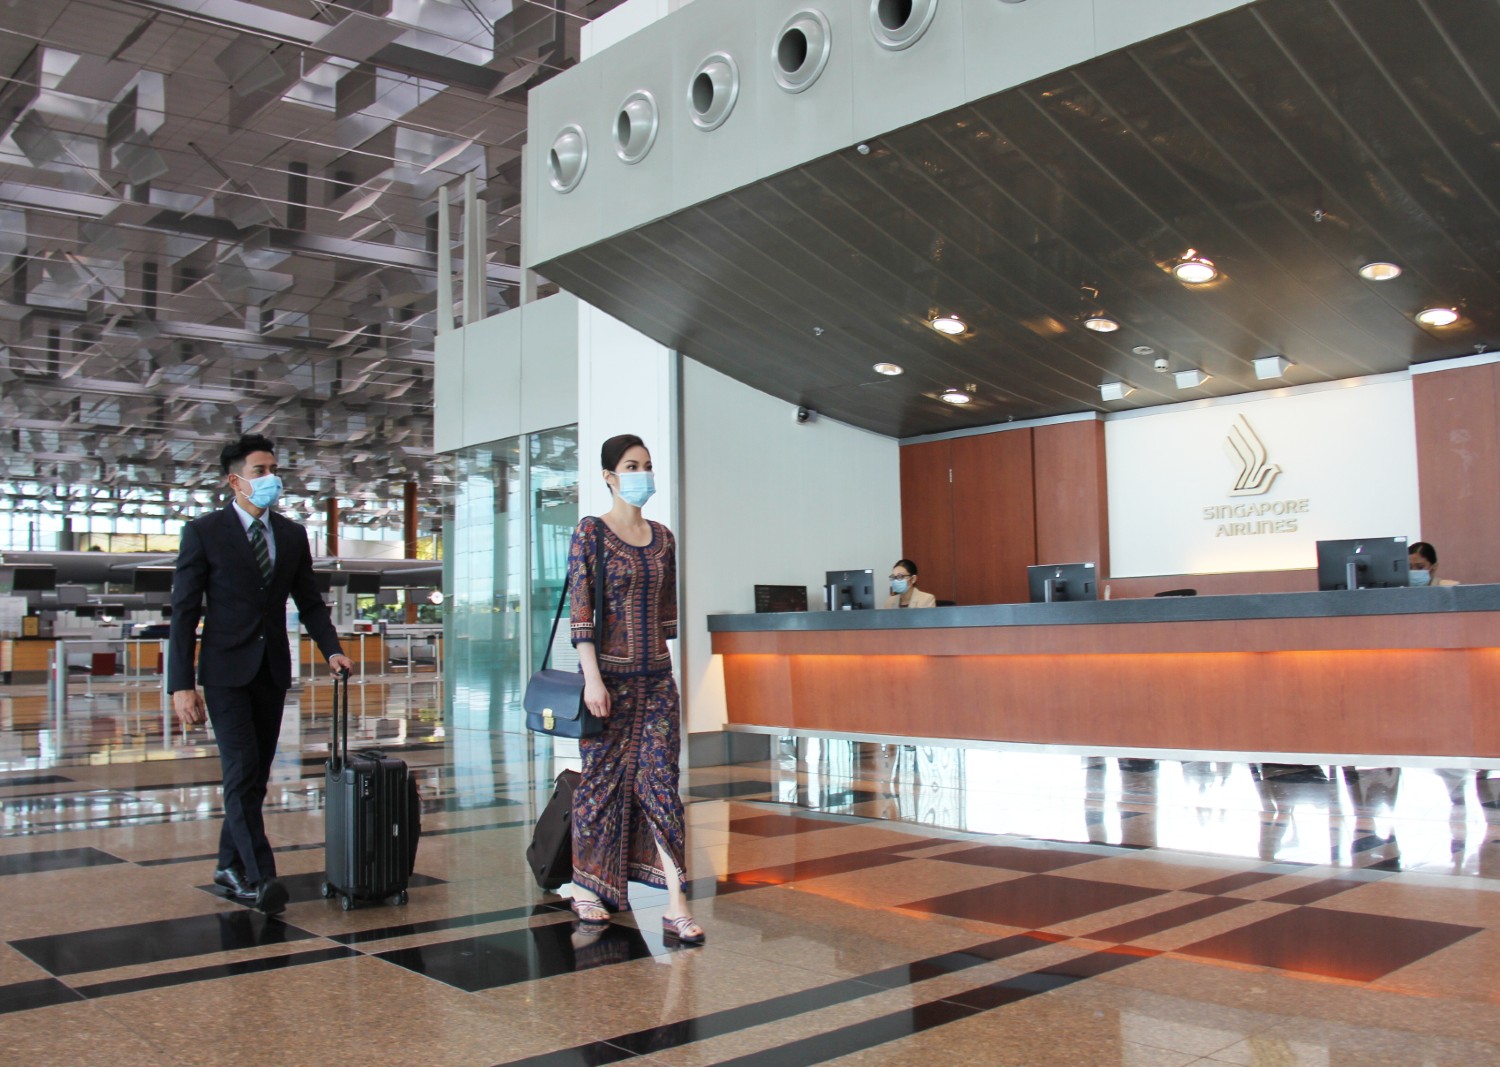 Singapore Airlines’ Seamless Customer Journey